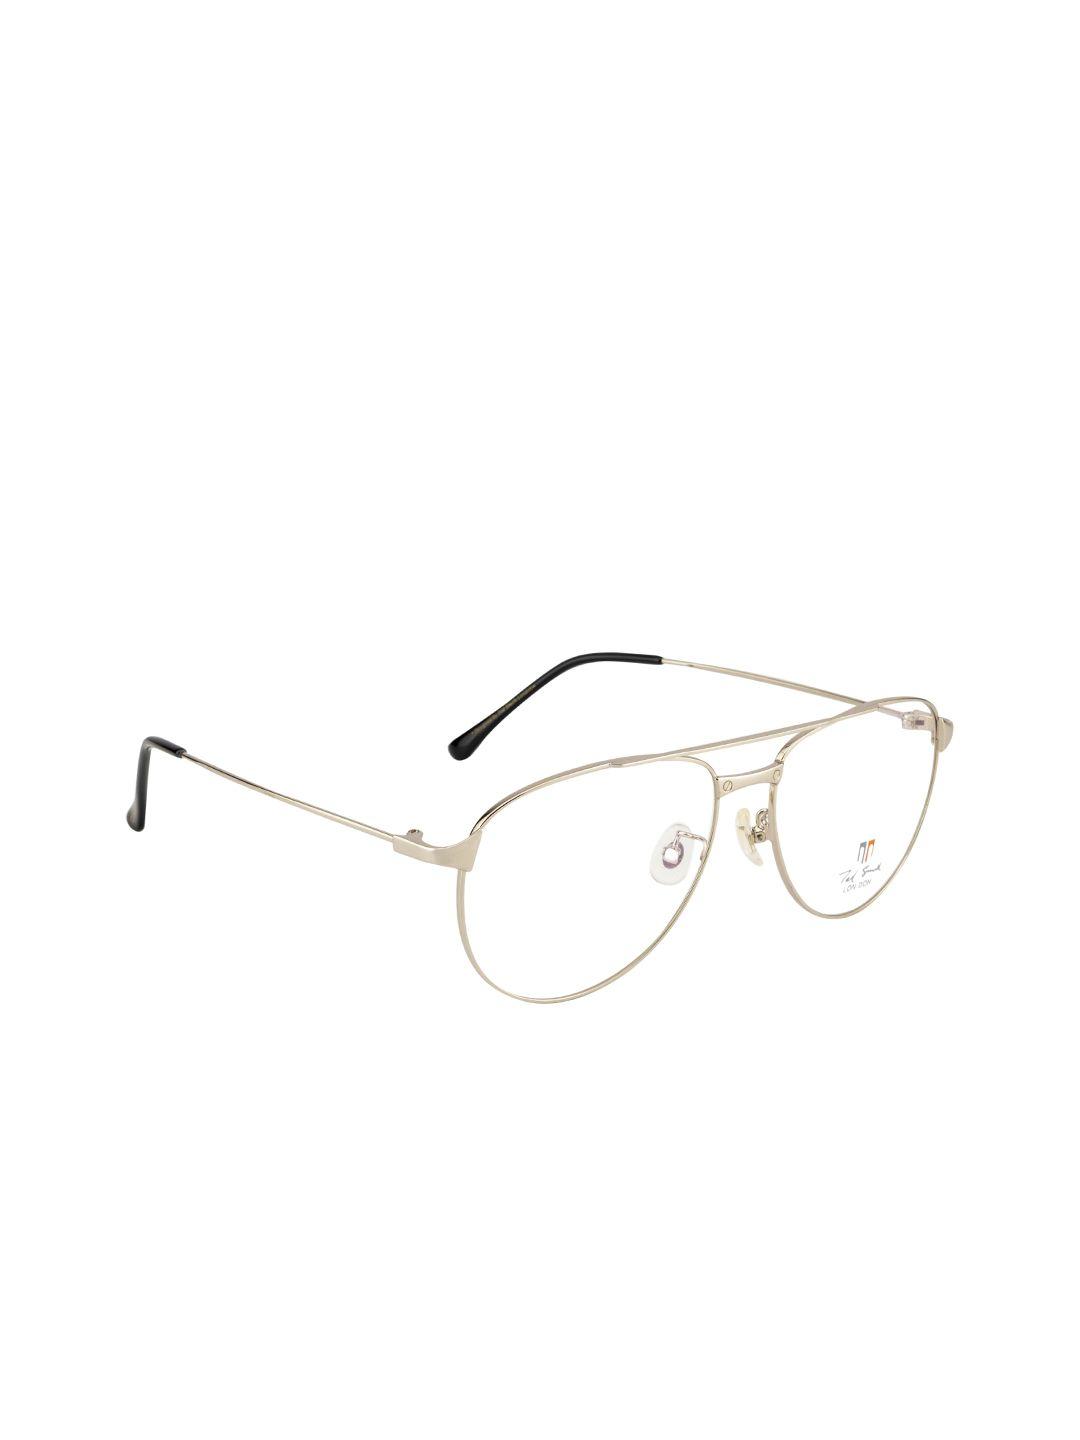 ted smith unisex silver-toned solid aviator frames ts-9077_c15